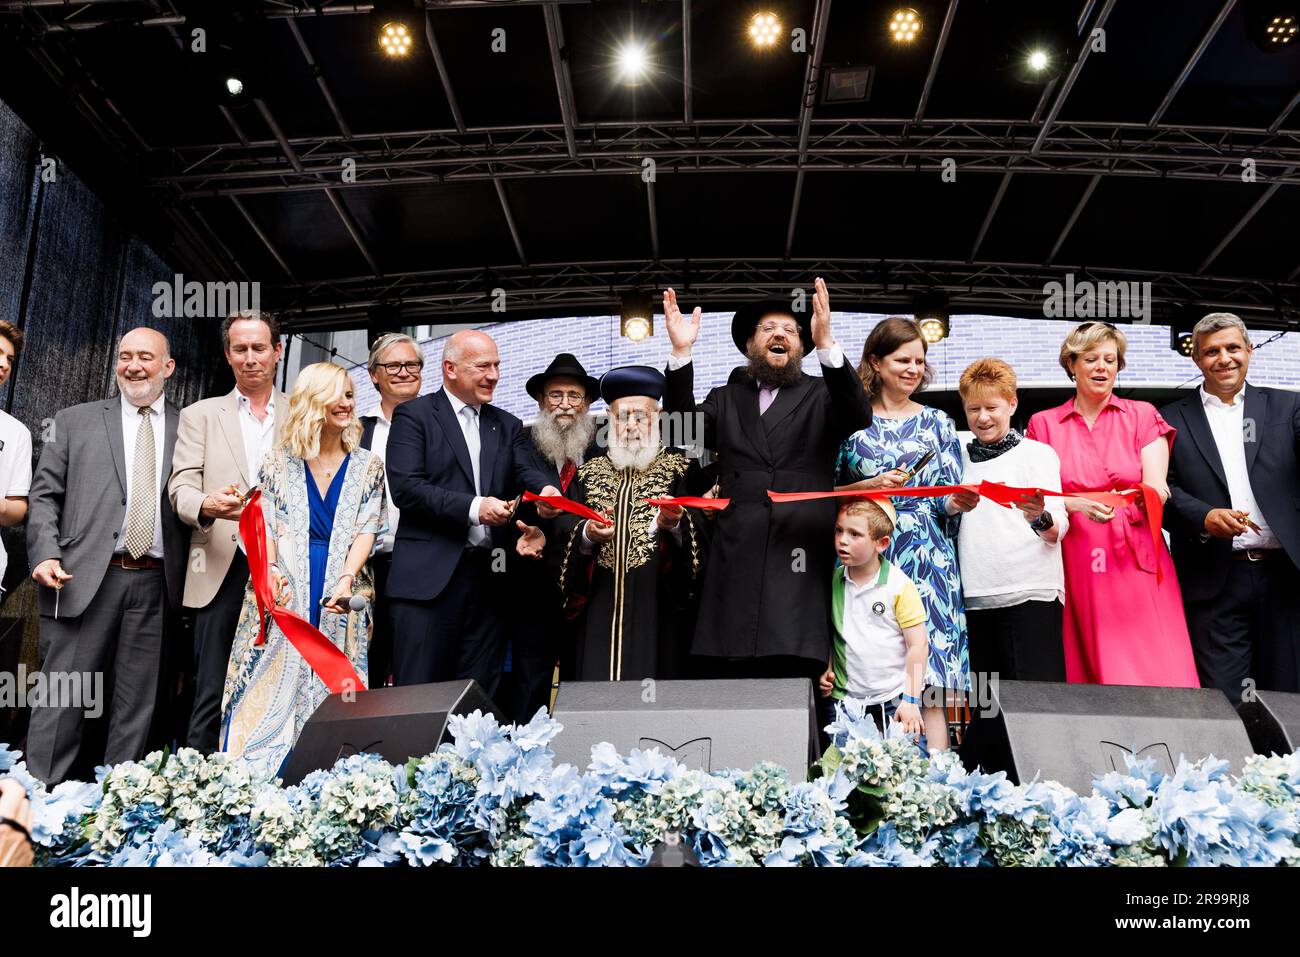 25 June 2023, Berlin: Opening ceremony Pears Jewish Campus (PJC) with Berlin's Governing Mayor Kai Wegner (M-l), the Israeli Ambassador Ron Prosor, the President of the Central Council of Jews and member of the Board of Trustees of the Jewish Campus Foundation, Josef Schuster. The largest Jewish institution for education, culture and sports since the Shoah was opened in Berlin with a street festival. The Pears Jewish Campus in Wilmersdorf offers 8,000 square meters of daycare, elementary and high school, art studios and music studios, a 100-seat movie theater, and a sports and event Stock Photo